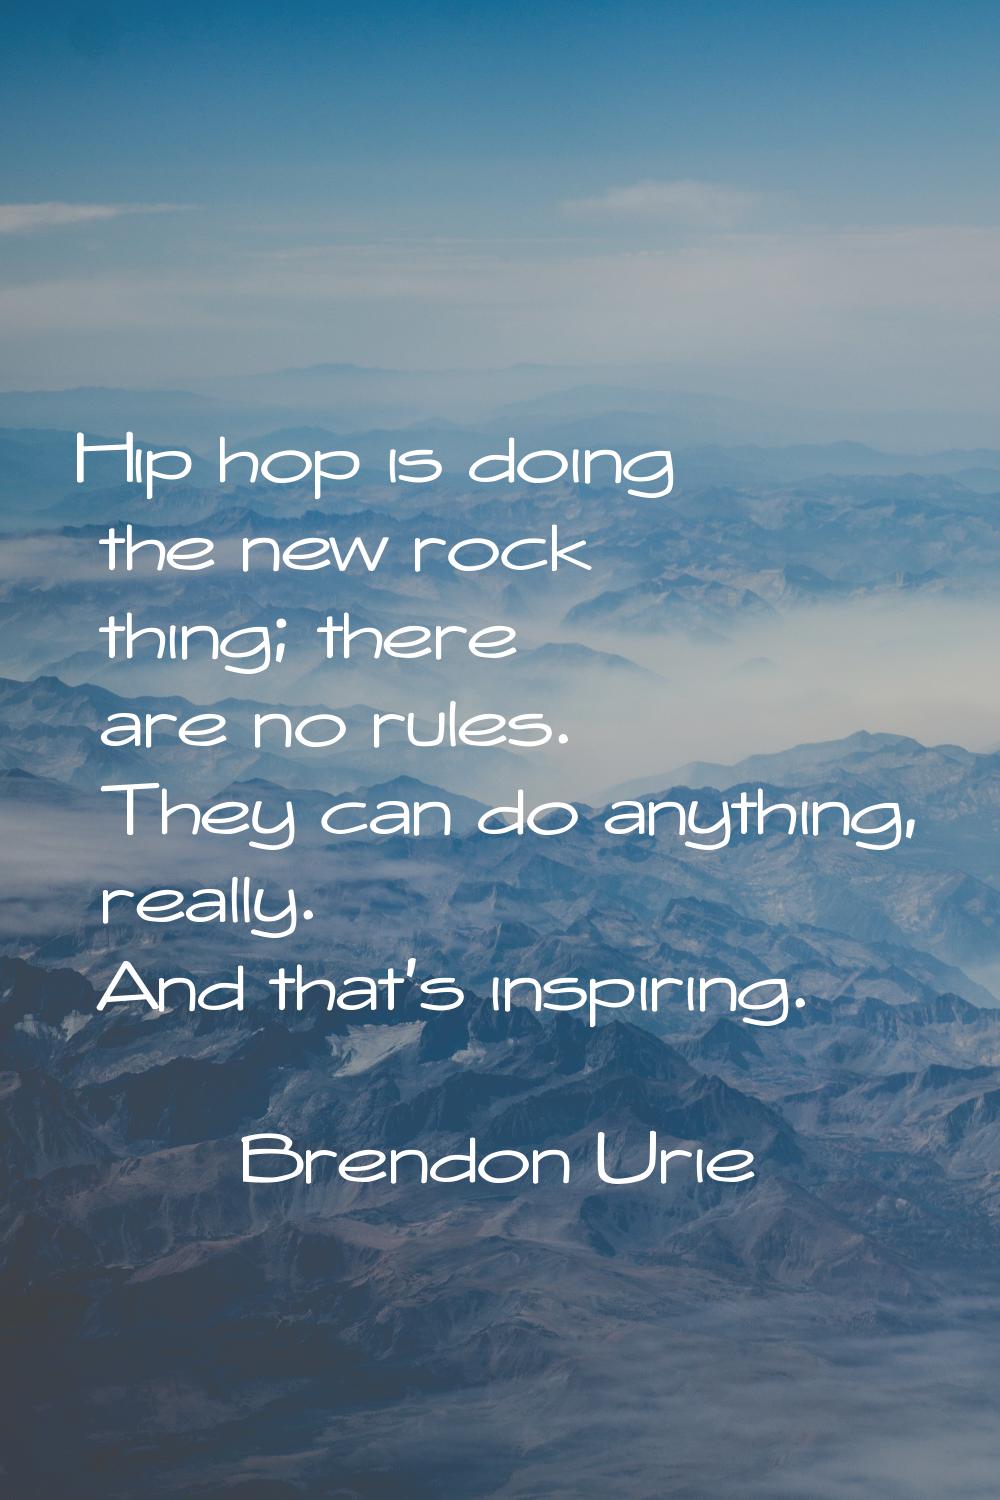 Hip hop is doing the new rock thing; there are no rules. They can do anything, really. And that's i